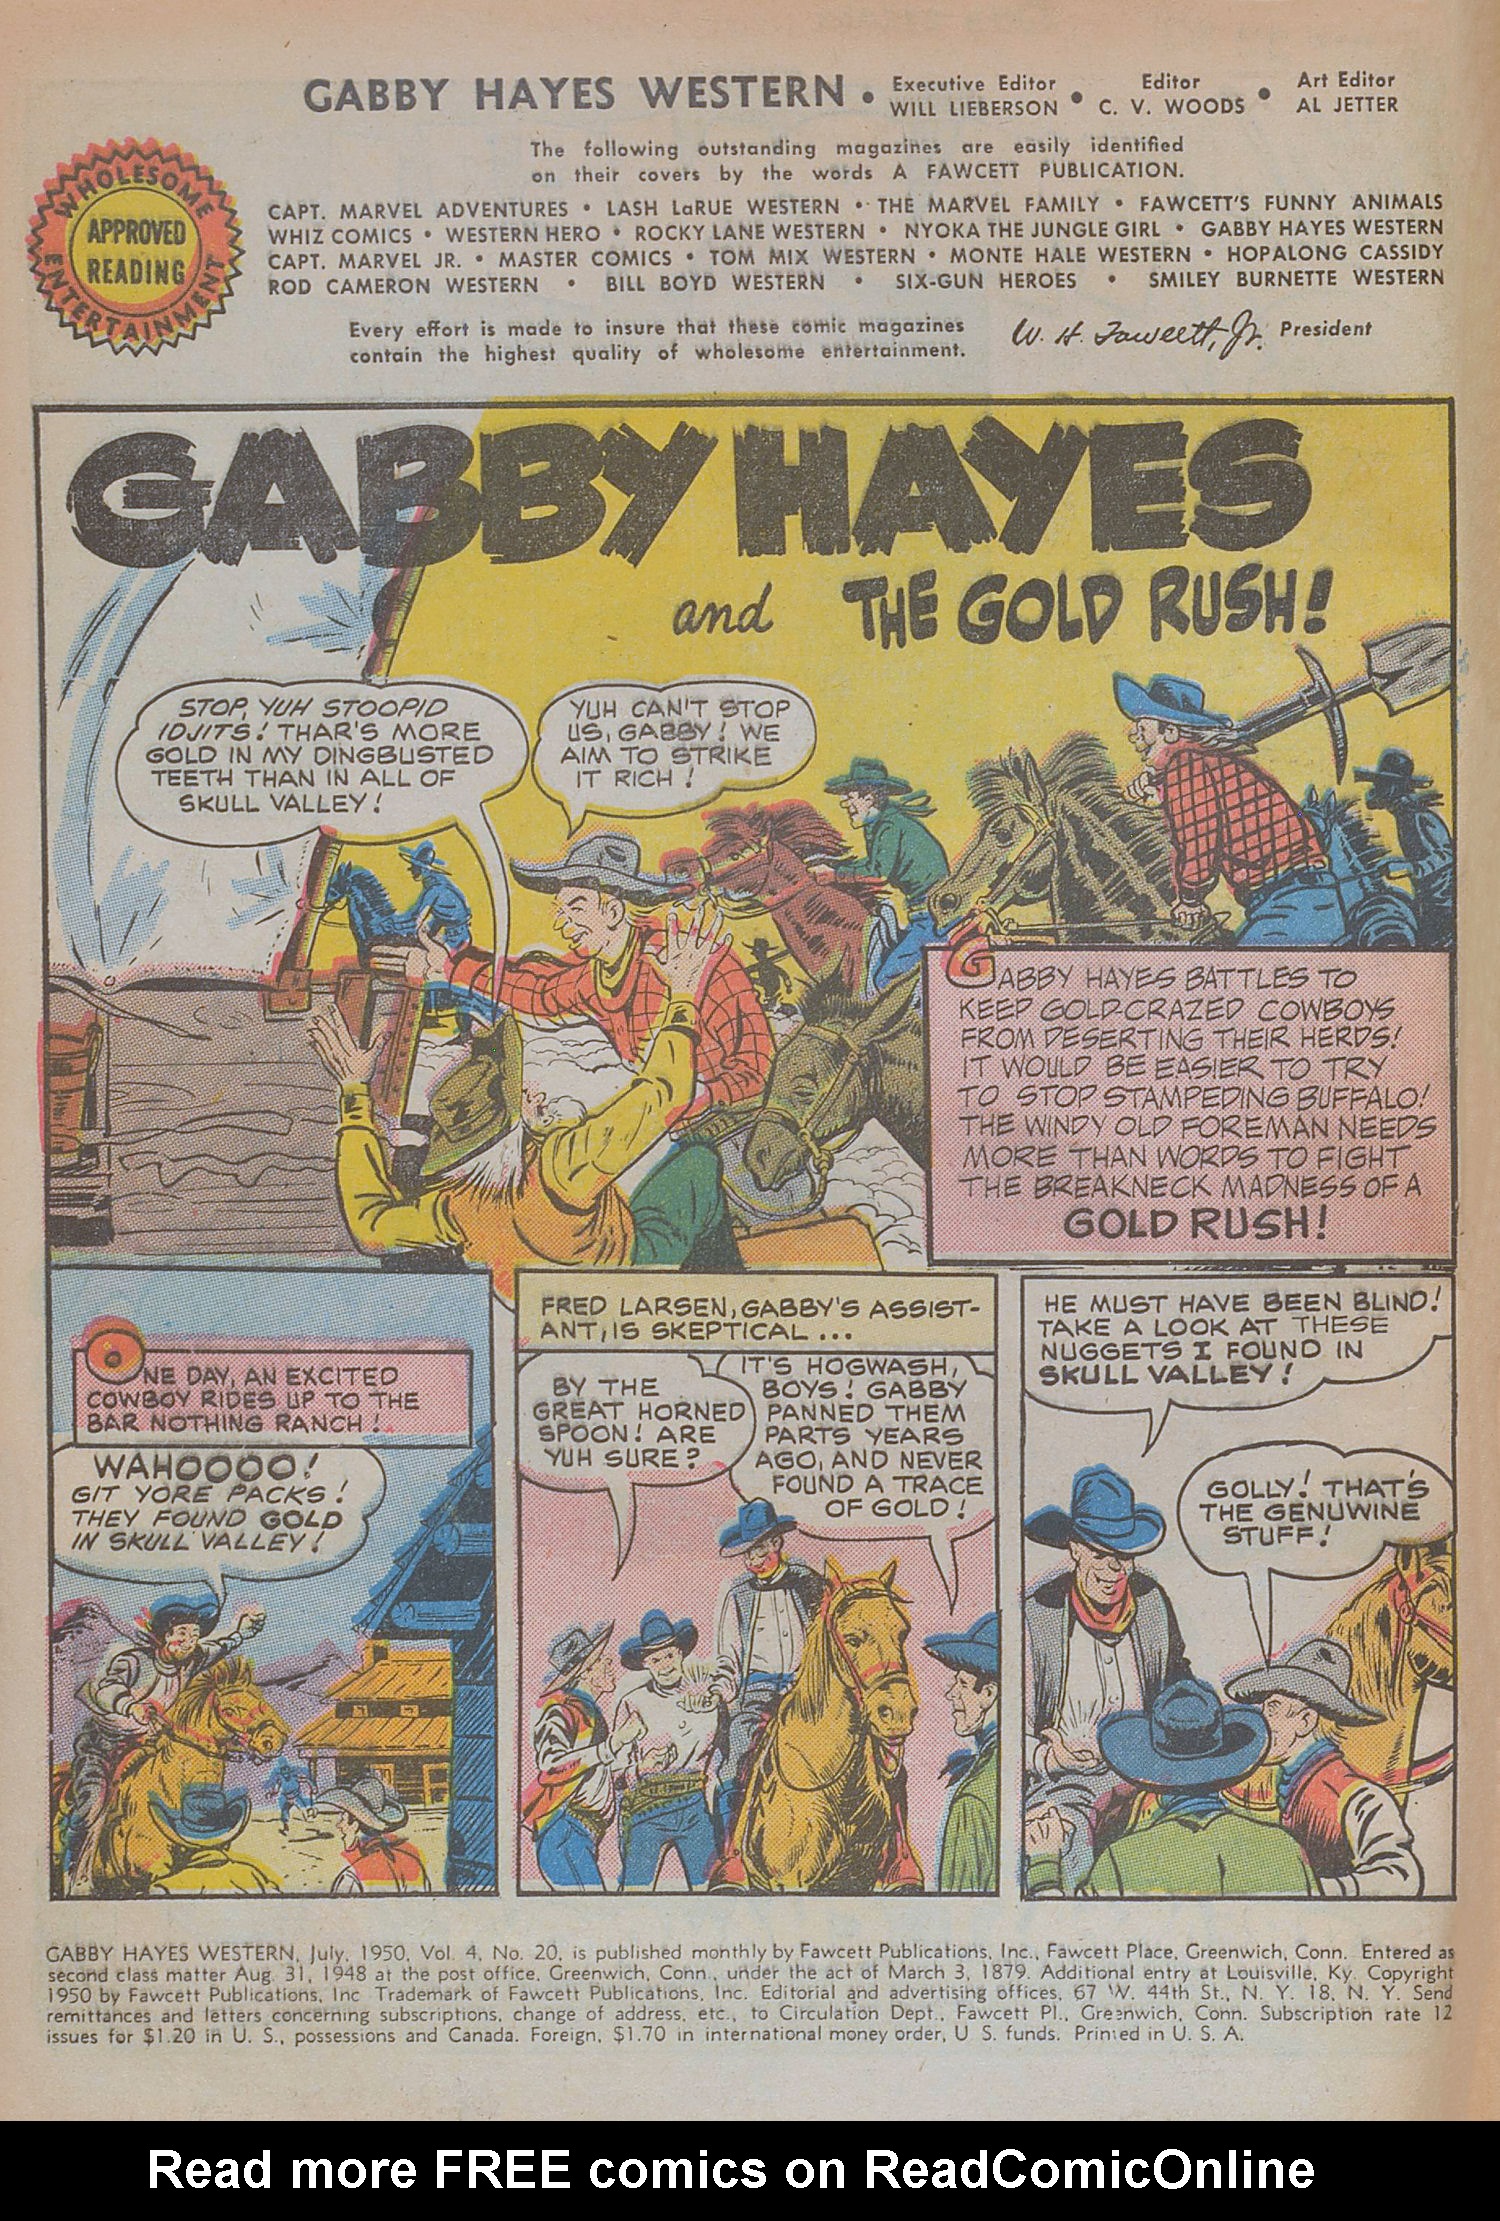 Read online Gabby Hayes Western comic -  Issue #20 - 4